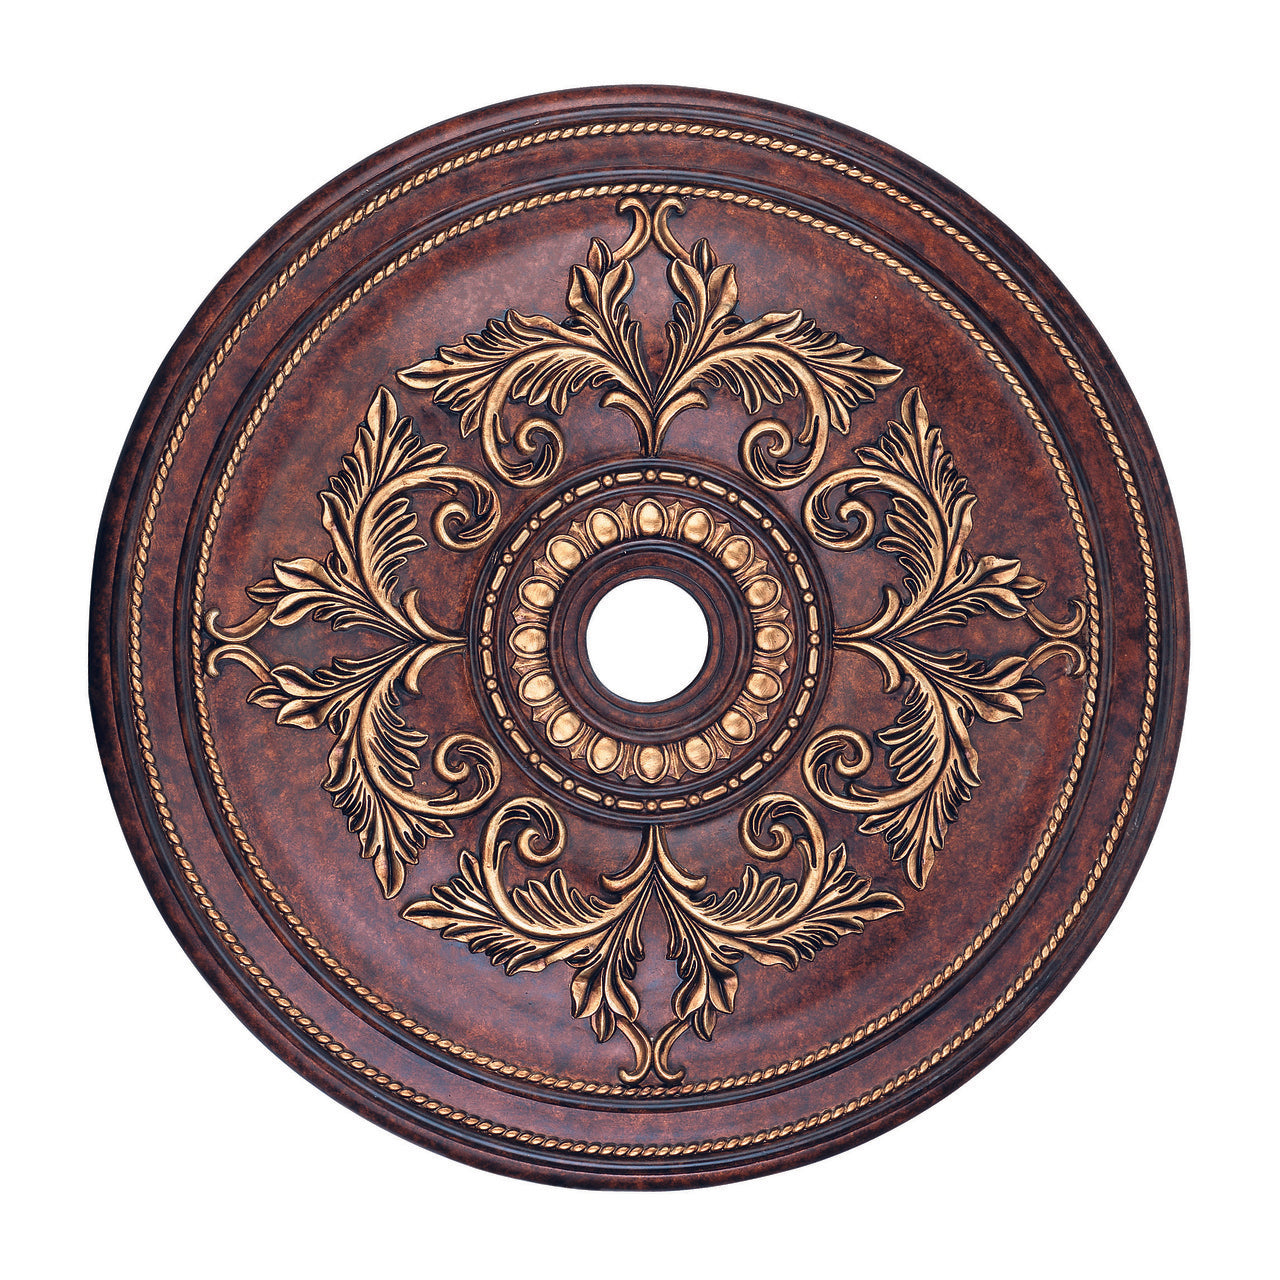 LIVEX Lighting 8211-63 Ceiling Medallion in Verona Bronze with Aged Gold Leaf Accents